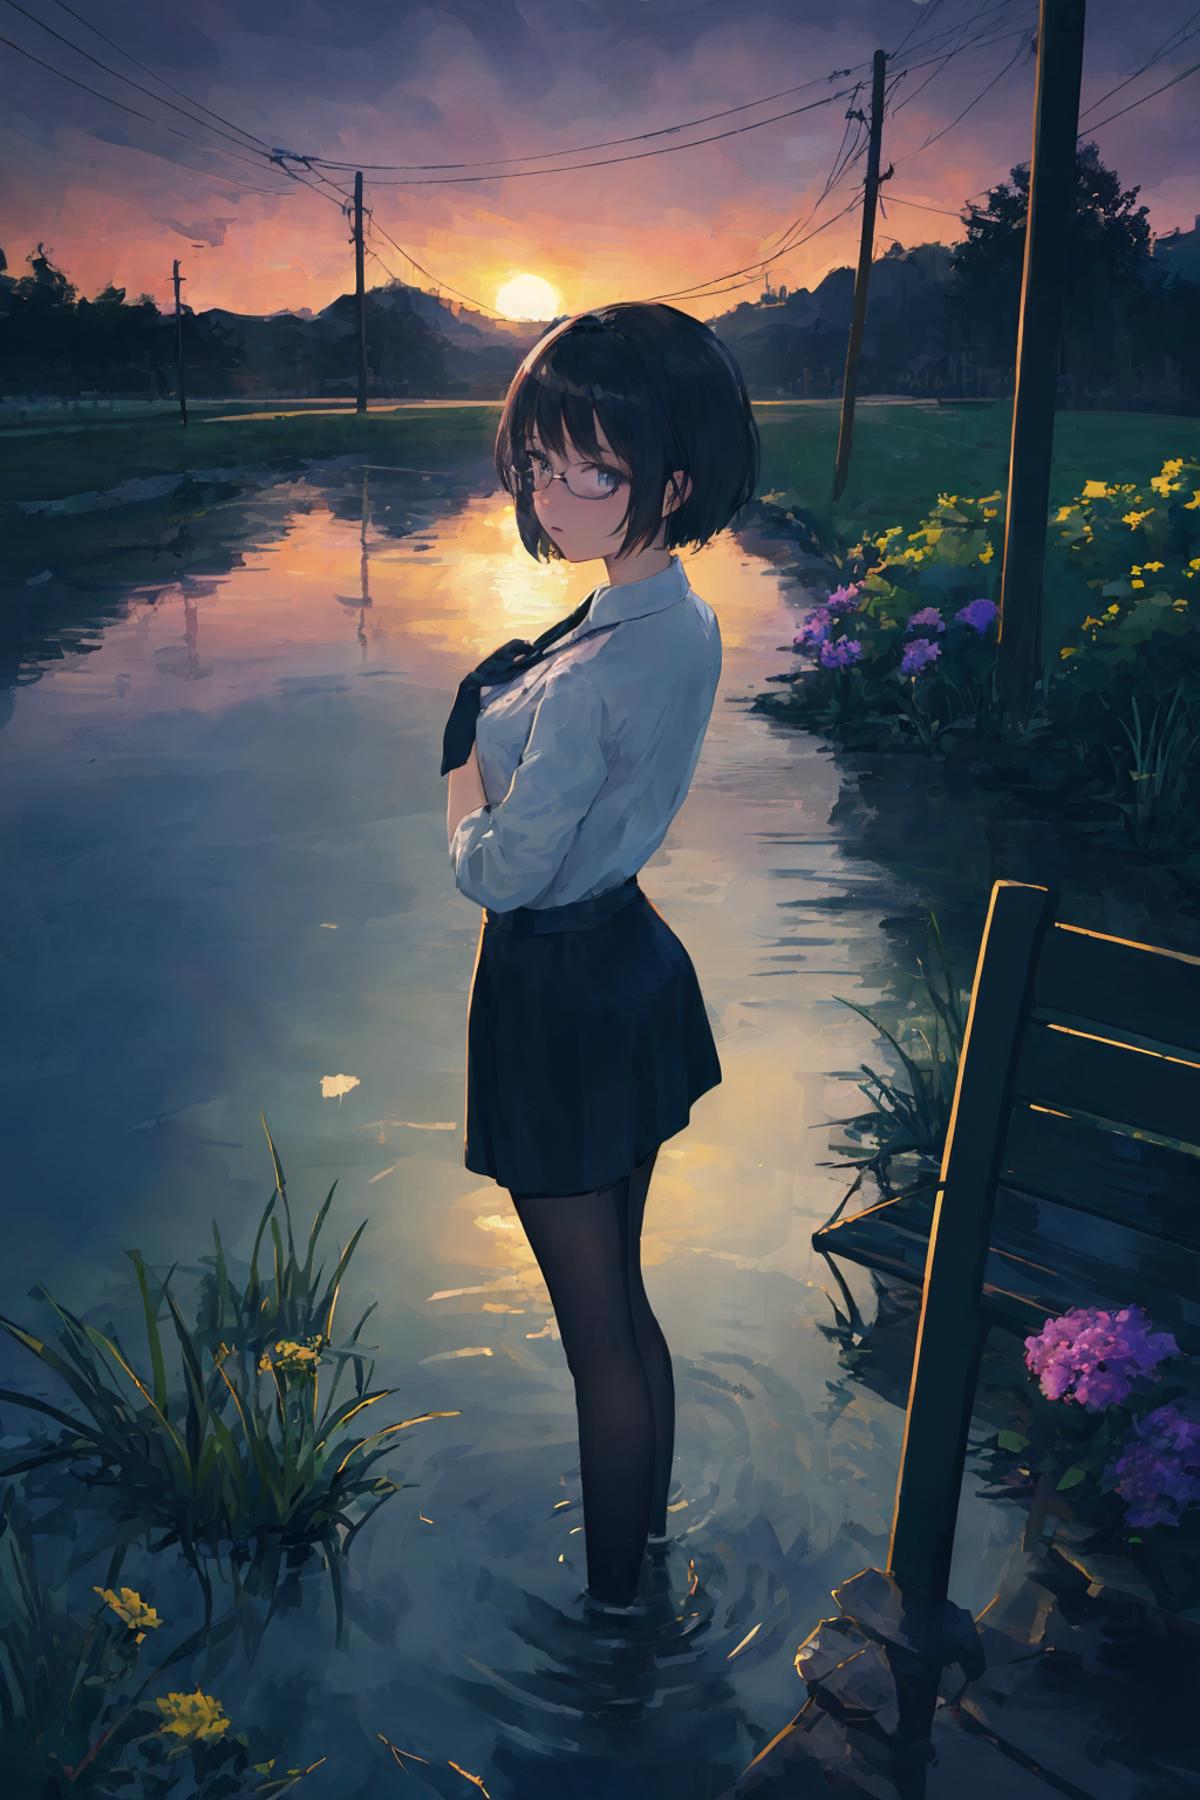 A woman in a black skirt and white shirt standing by a pond.